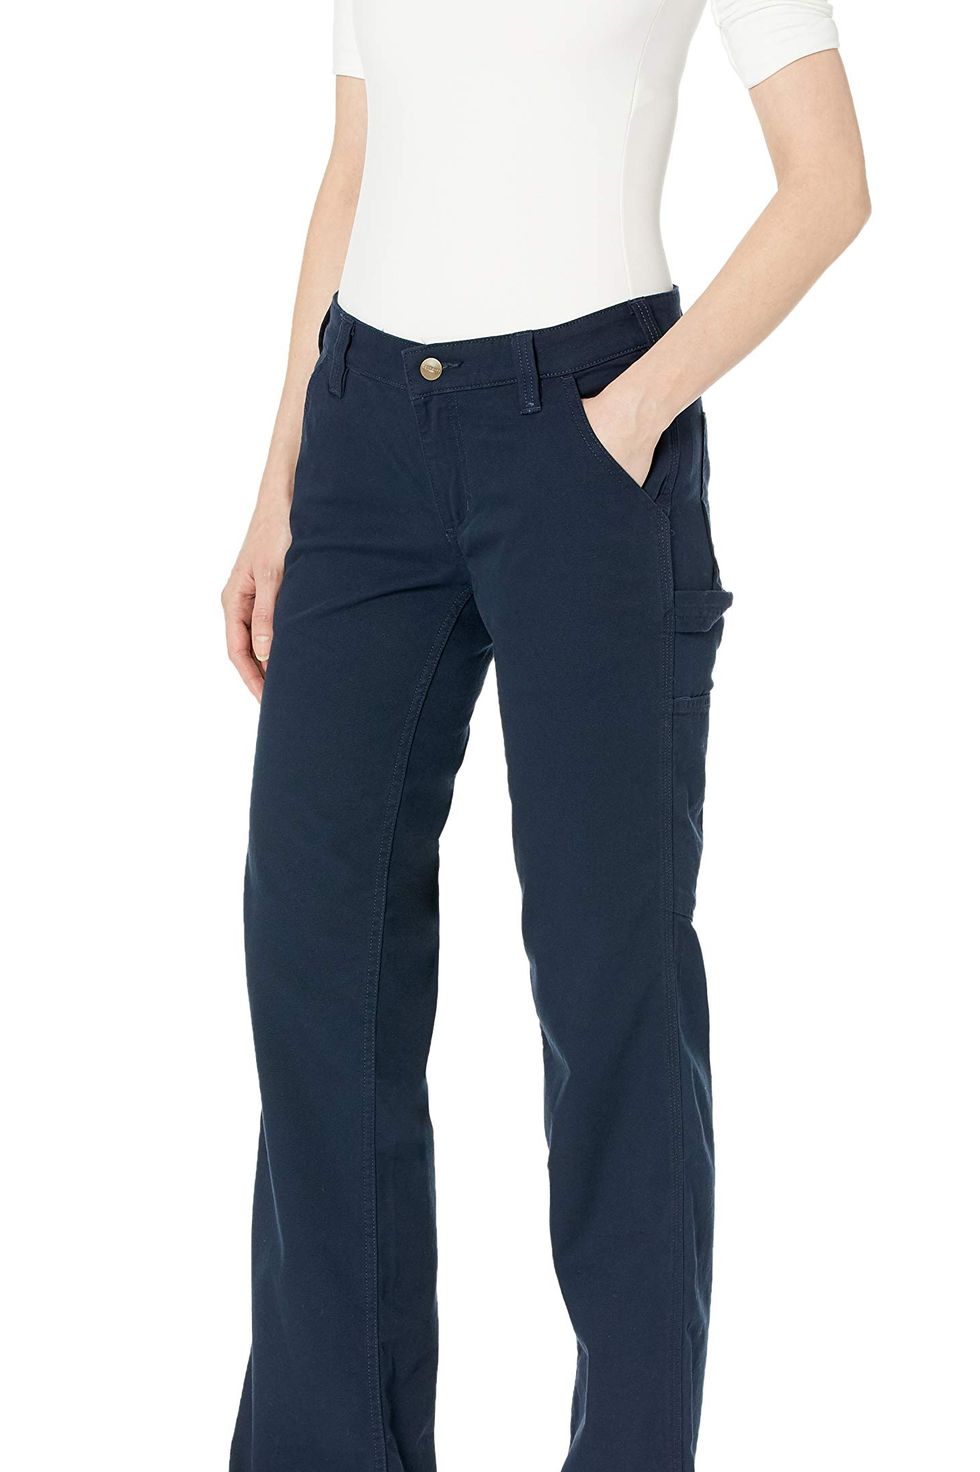 The Best Women's Cargo Pants of 2023 for Chic Utilitarian Style